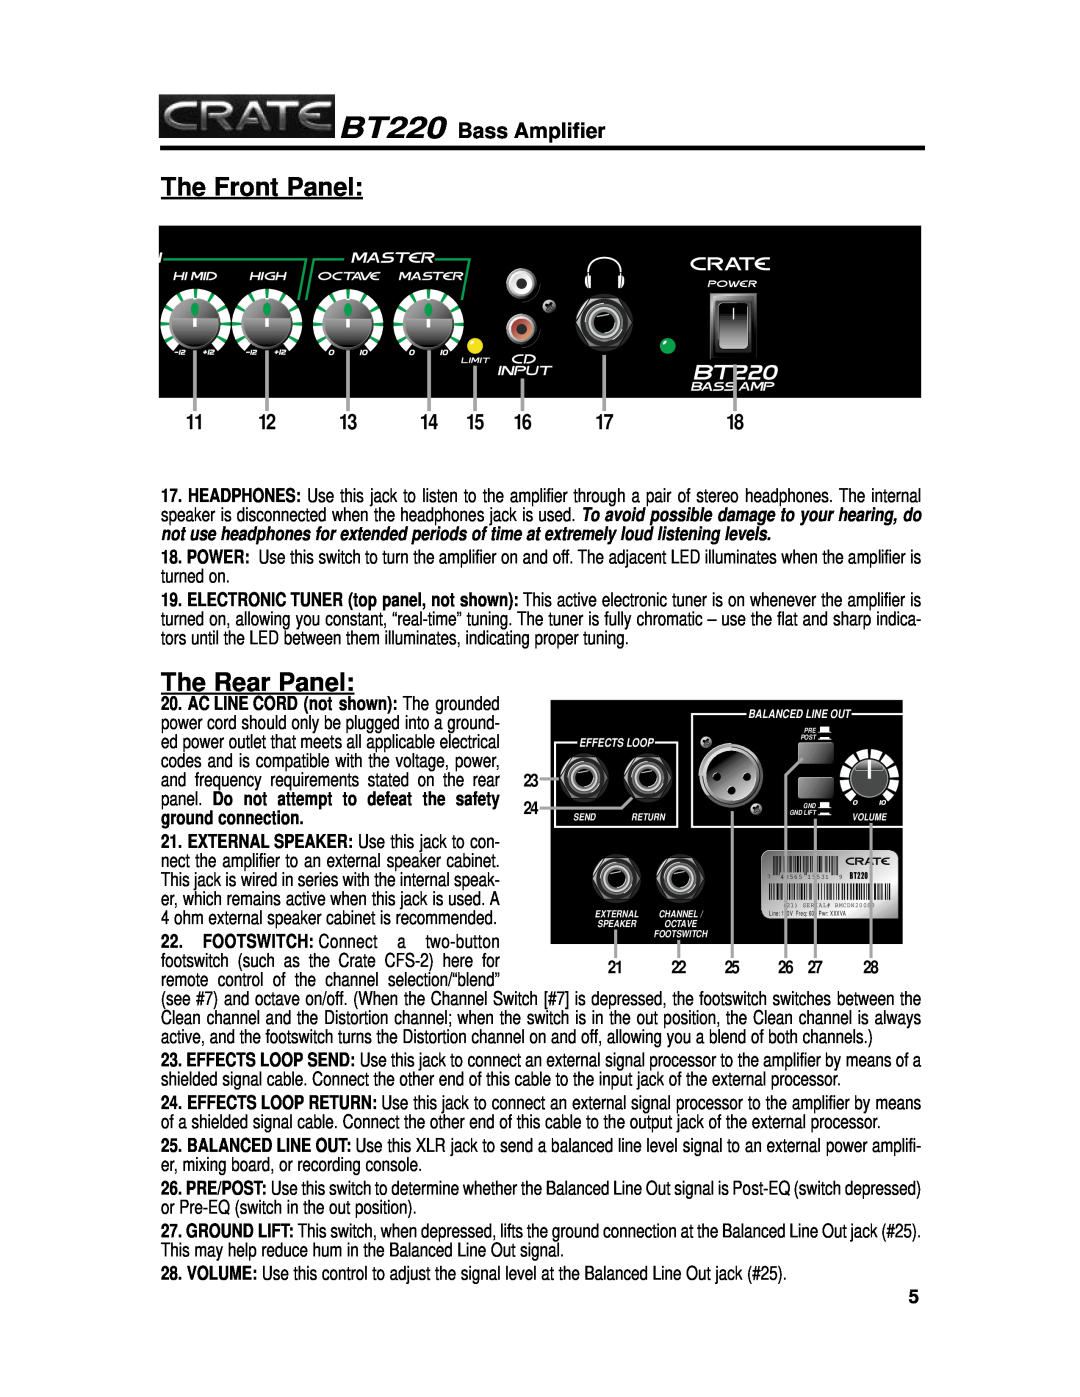 Crate Amplifiers manual The Front Panel, The Rear Panel, BT220 Bass Amplifier, ground connection 